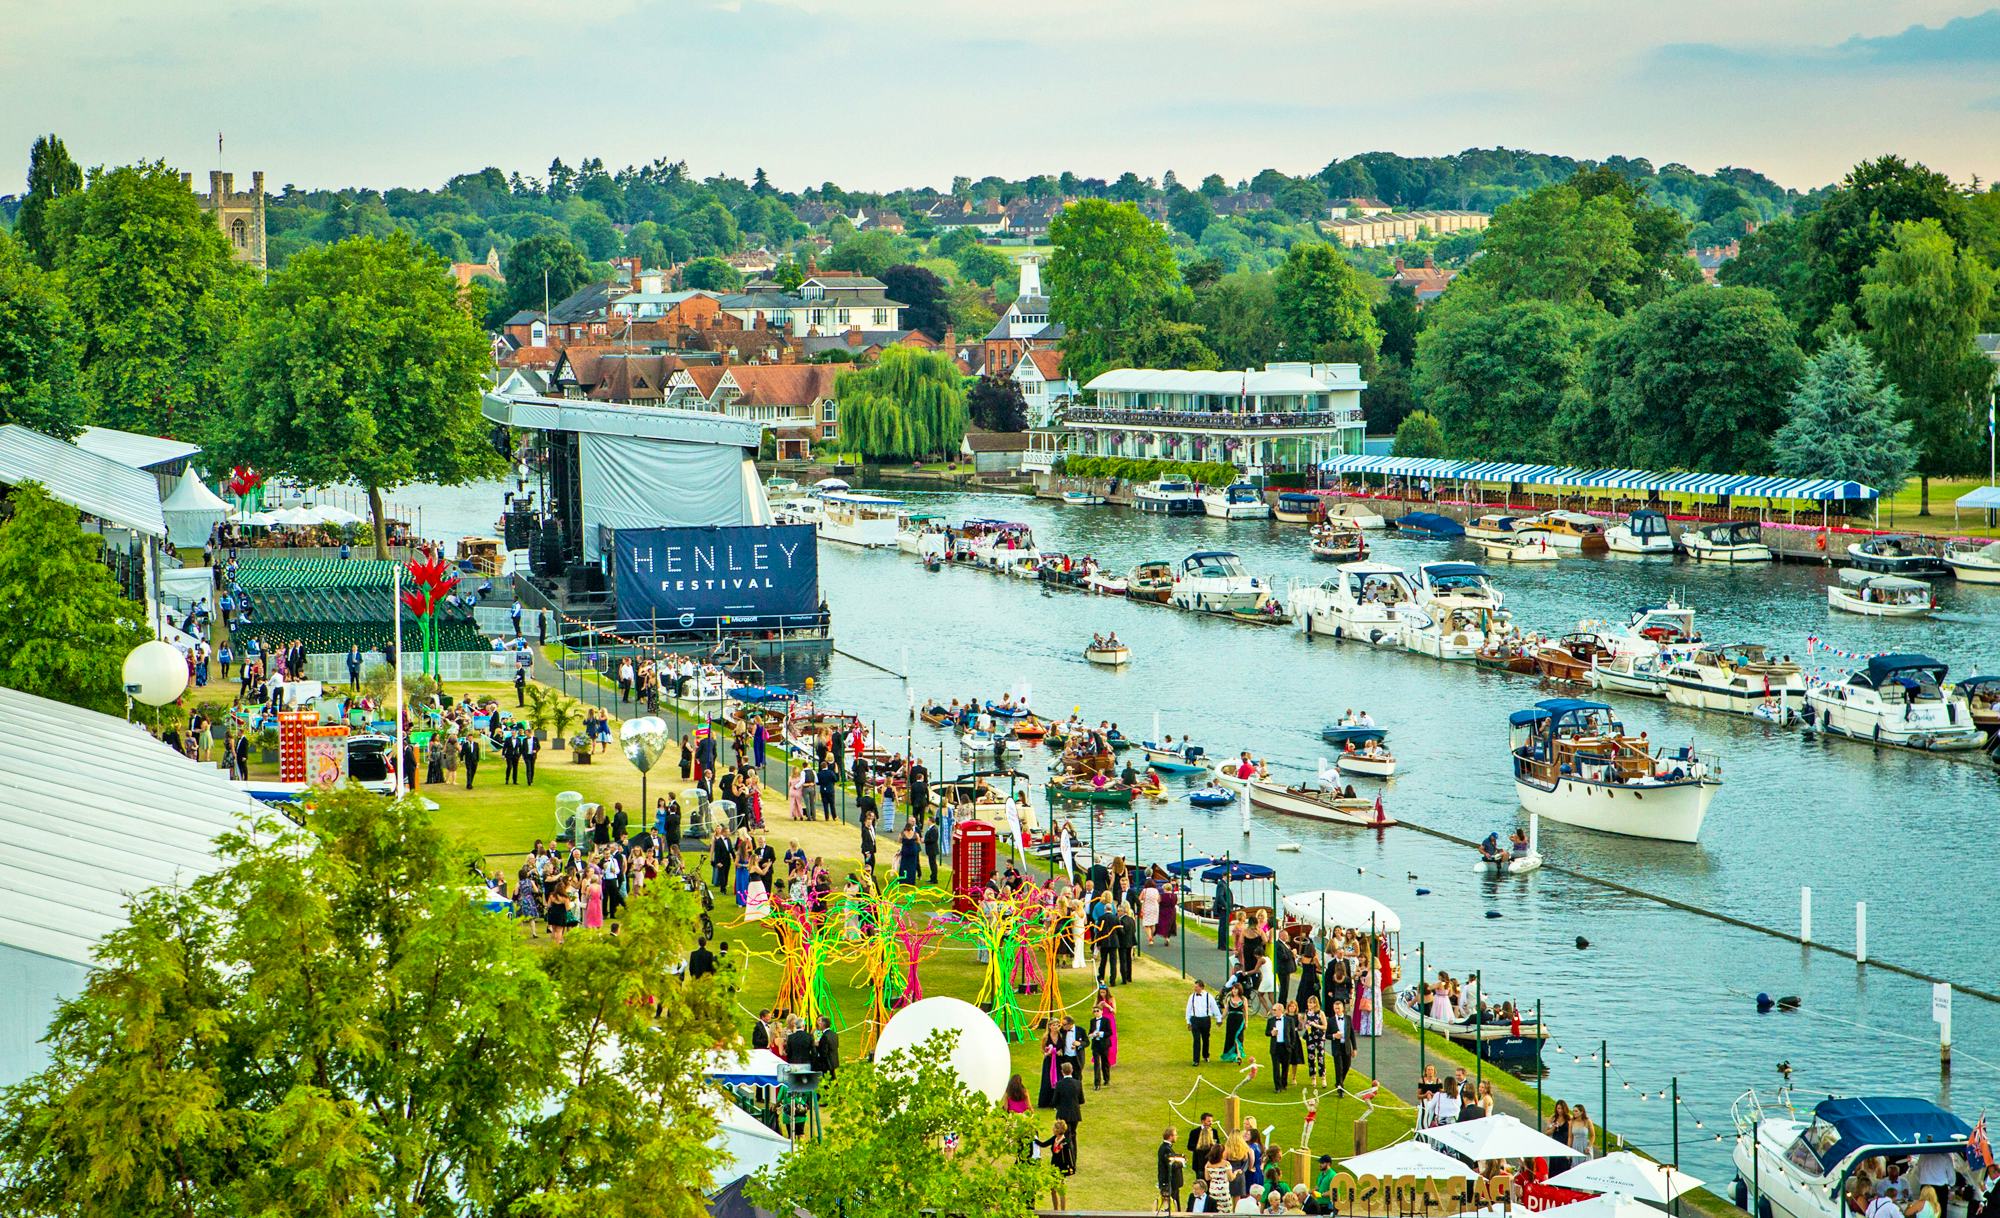 Henley Festival Henley on Thames music festivals michelin starred food hospitality packages